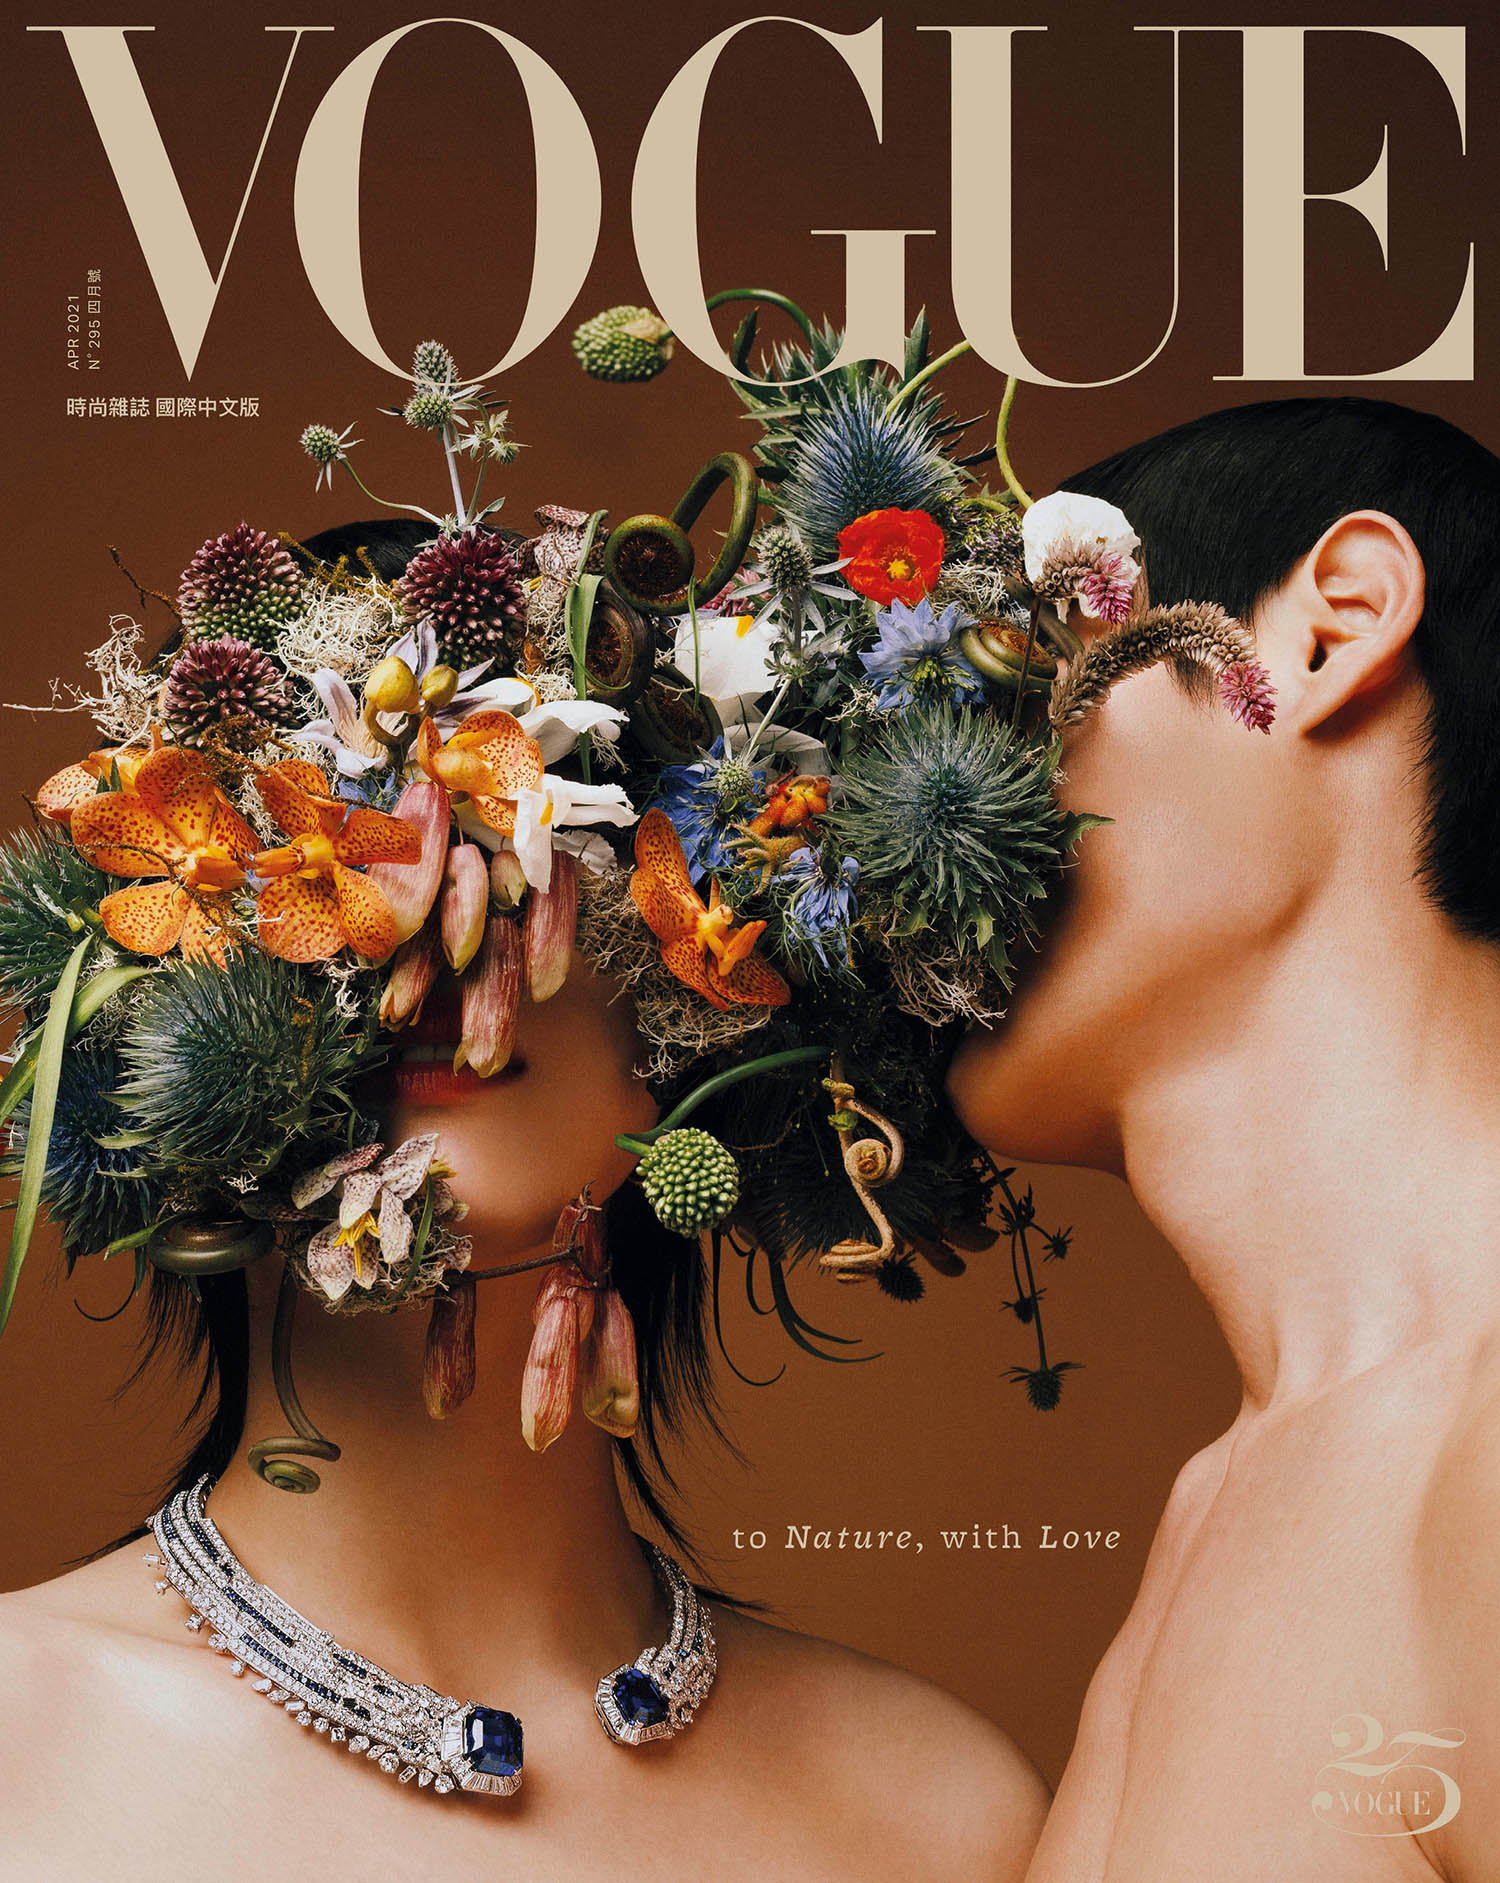 Jessie Hsu and Jean Chang cover Vogue Taiwan April 2021 by Zhong Lin